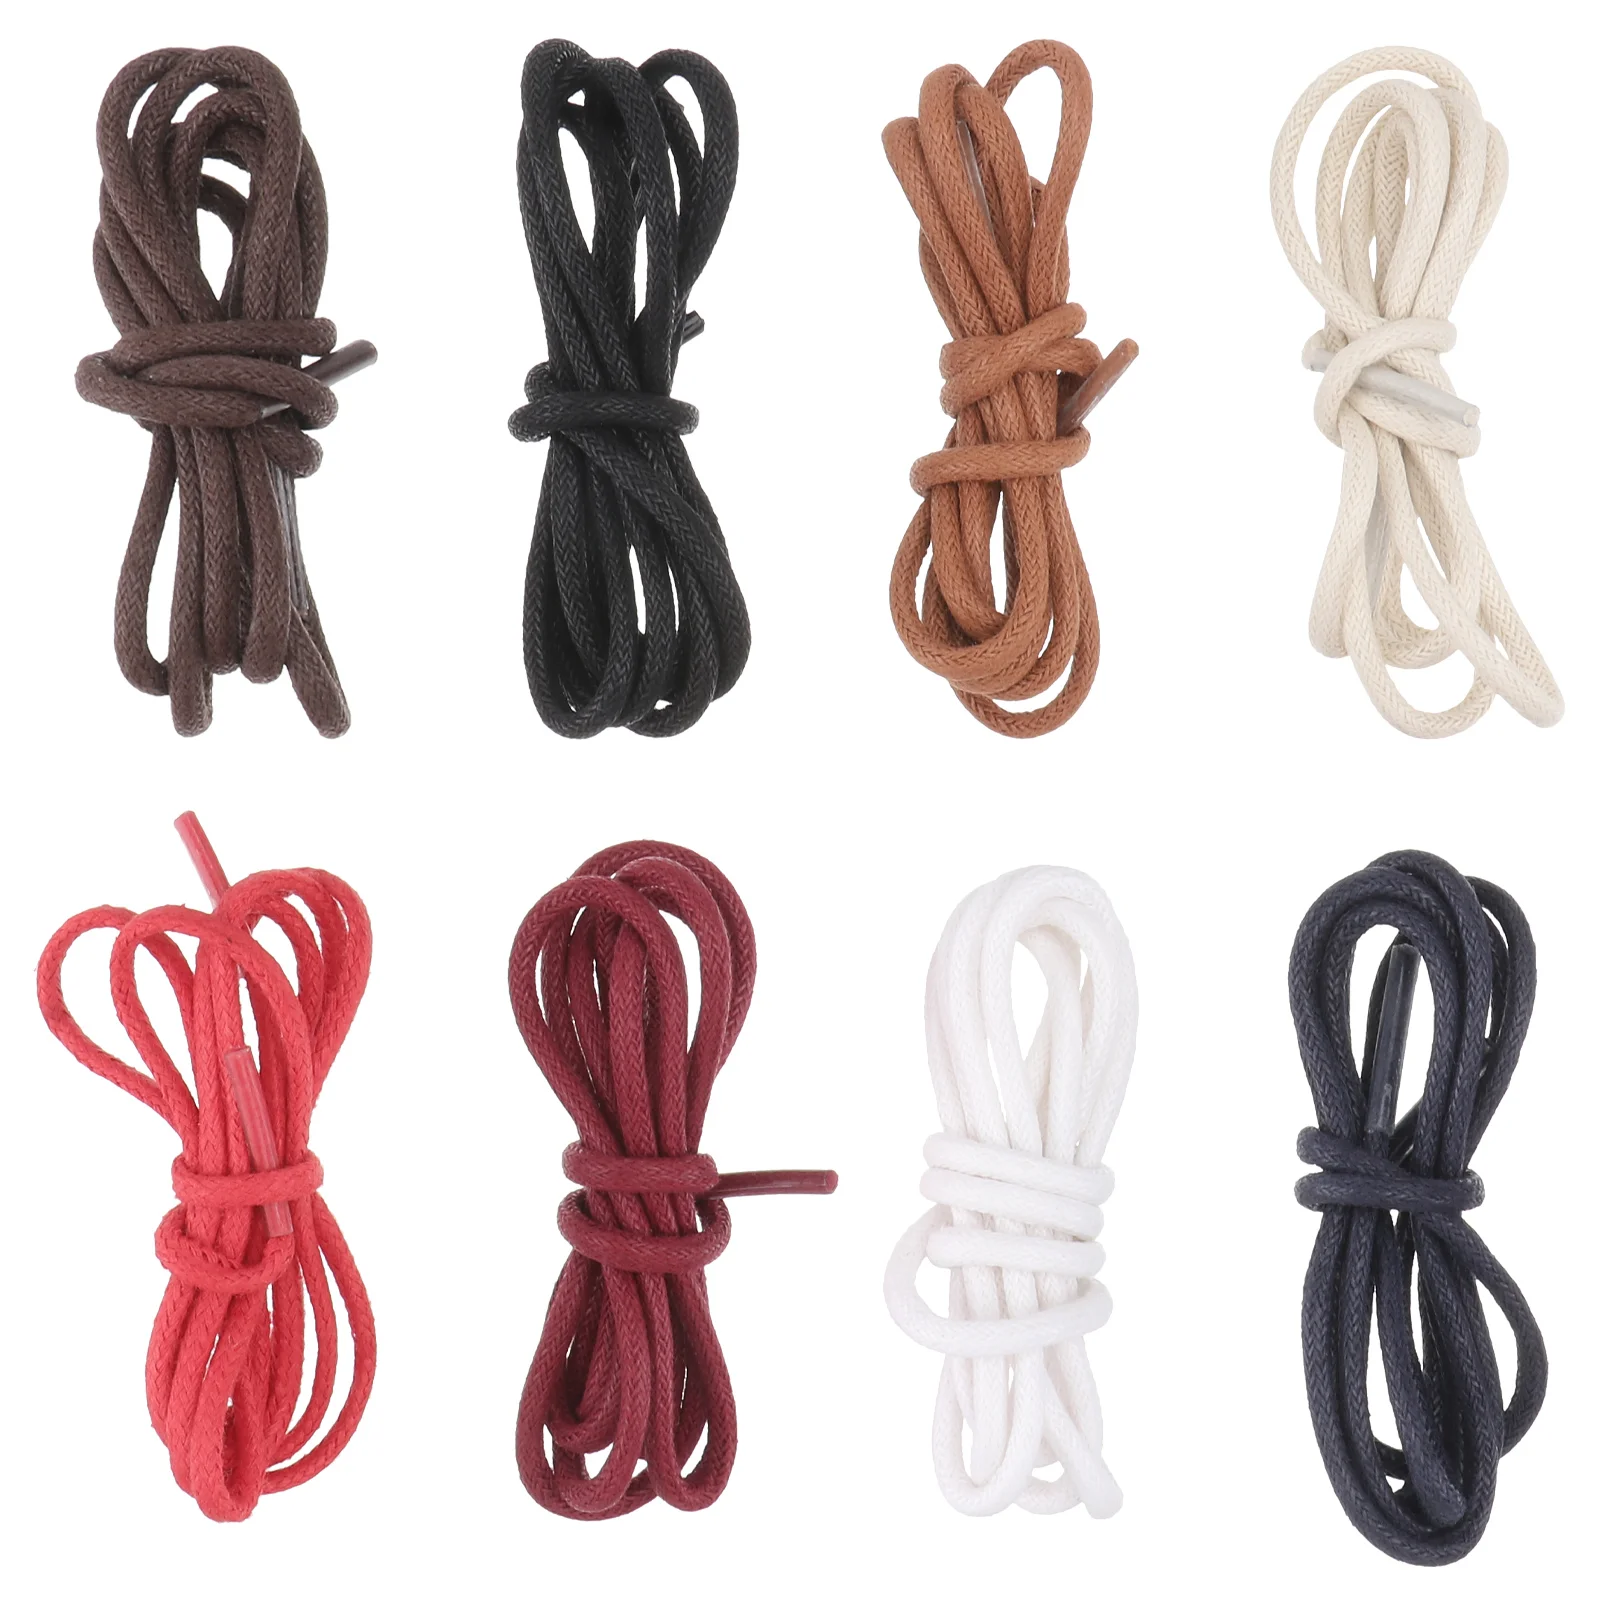 

8 Pairs Waxed Cotton Laces Shoe Ties Boots Shoelaces Round Fashionable Durable Classic